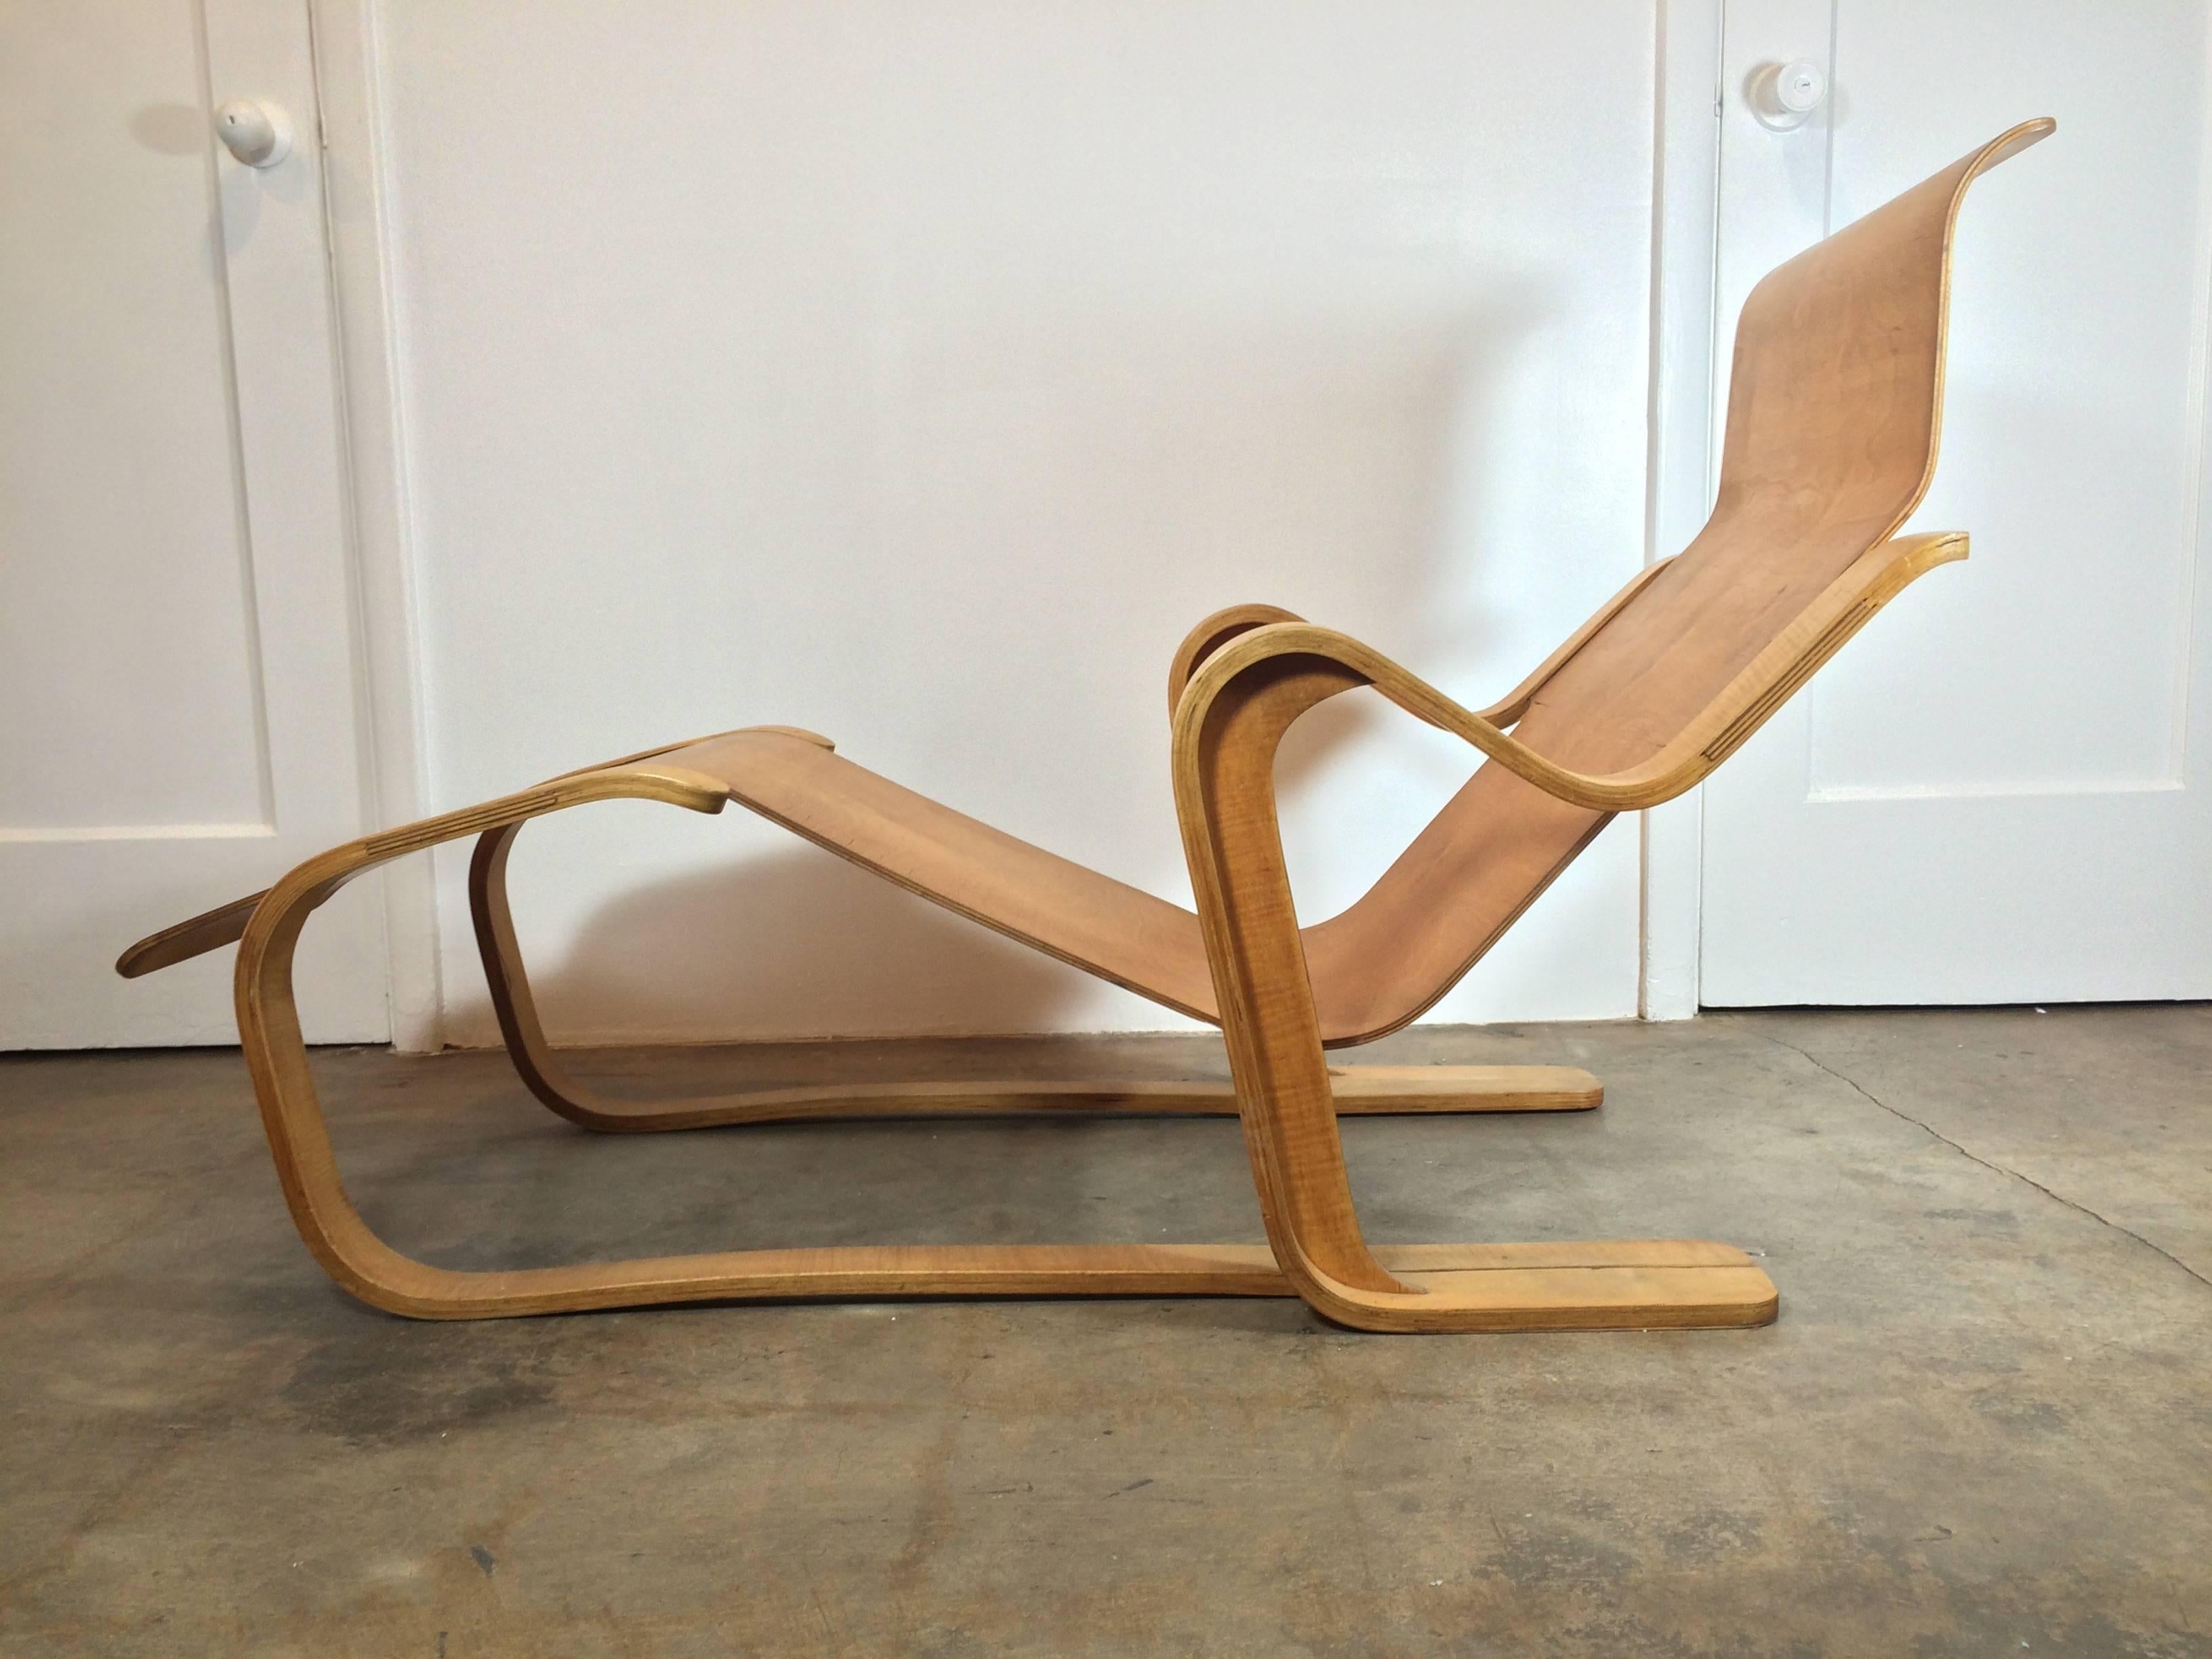 'Long Chair' designed by Marcel Breuer, made by Isokon Furniture Company, England, 1935-36

The 'Long chair', with its bent frame of laminated birch wood supporting the shaped timber seat and back, was developed soon after Marcel Breuer settled in